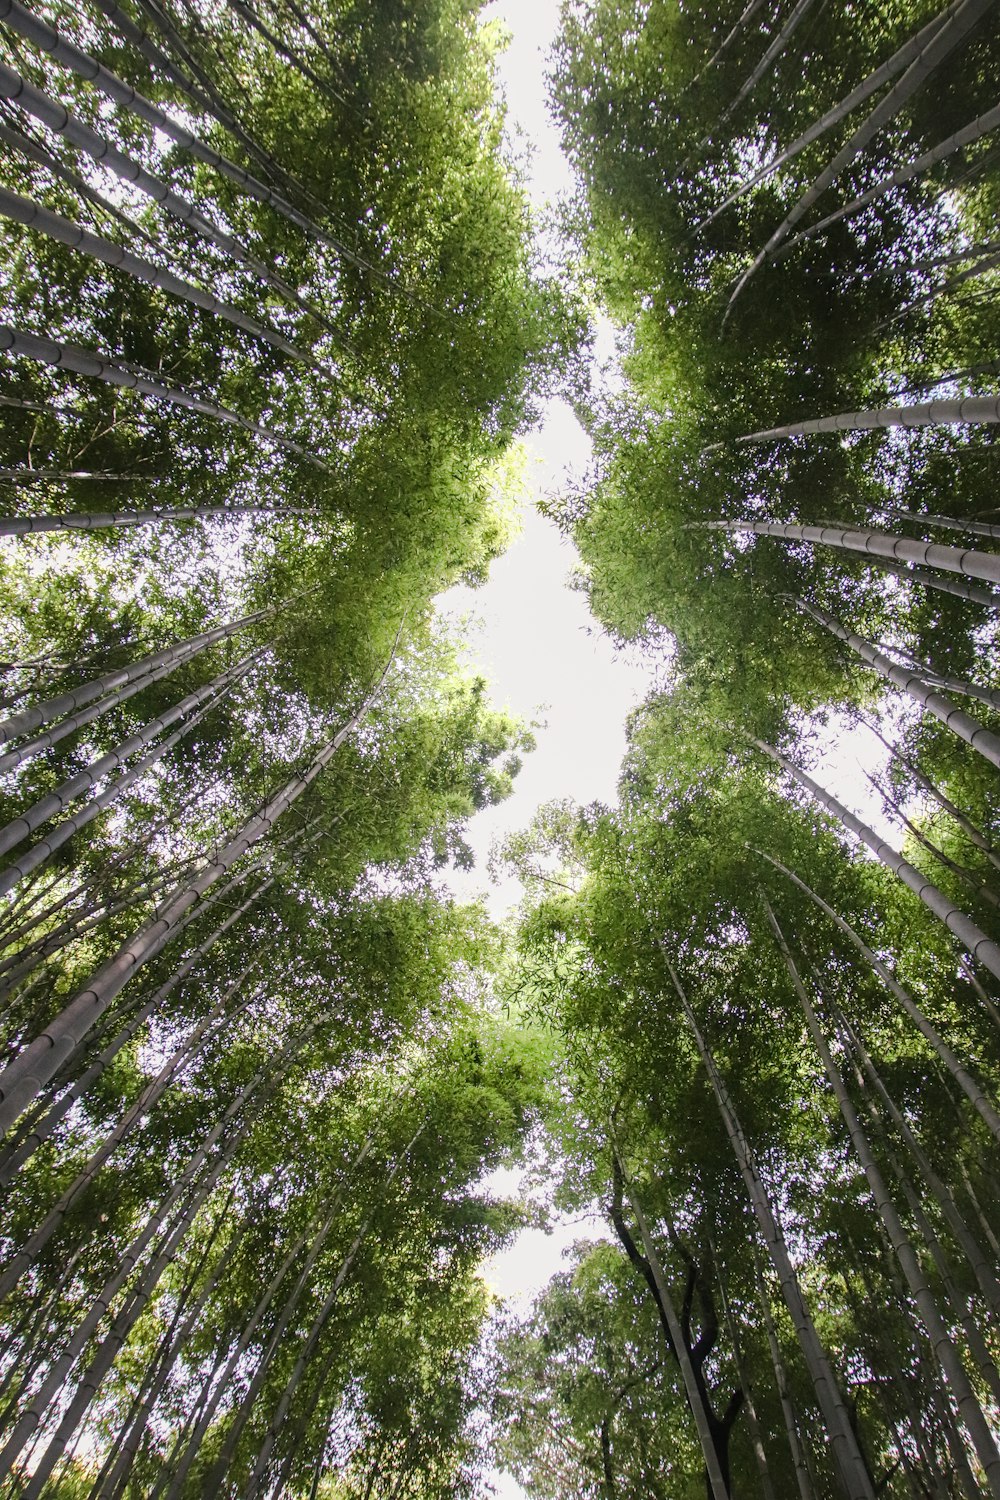 looking up into the canopy of a bamboo forest